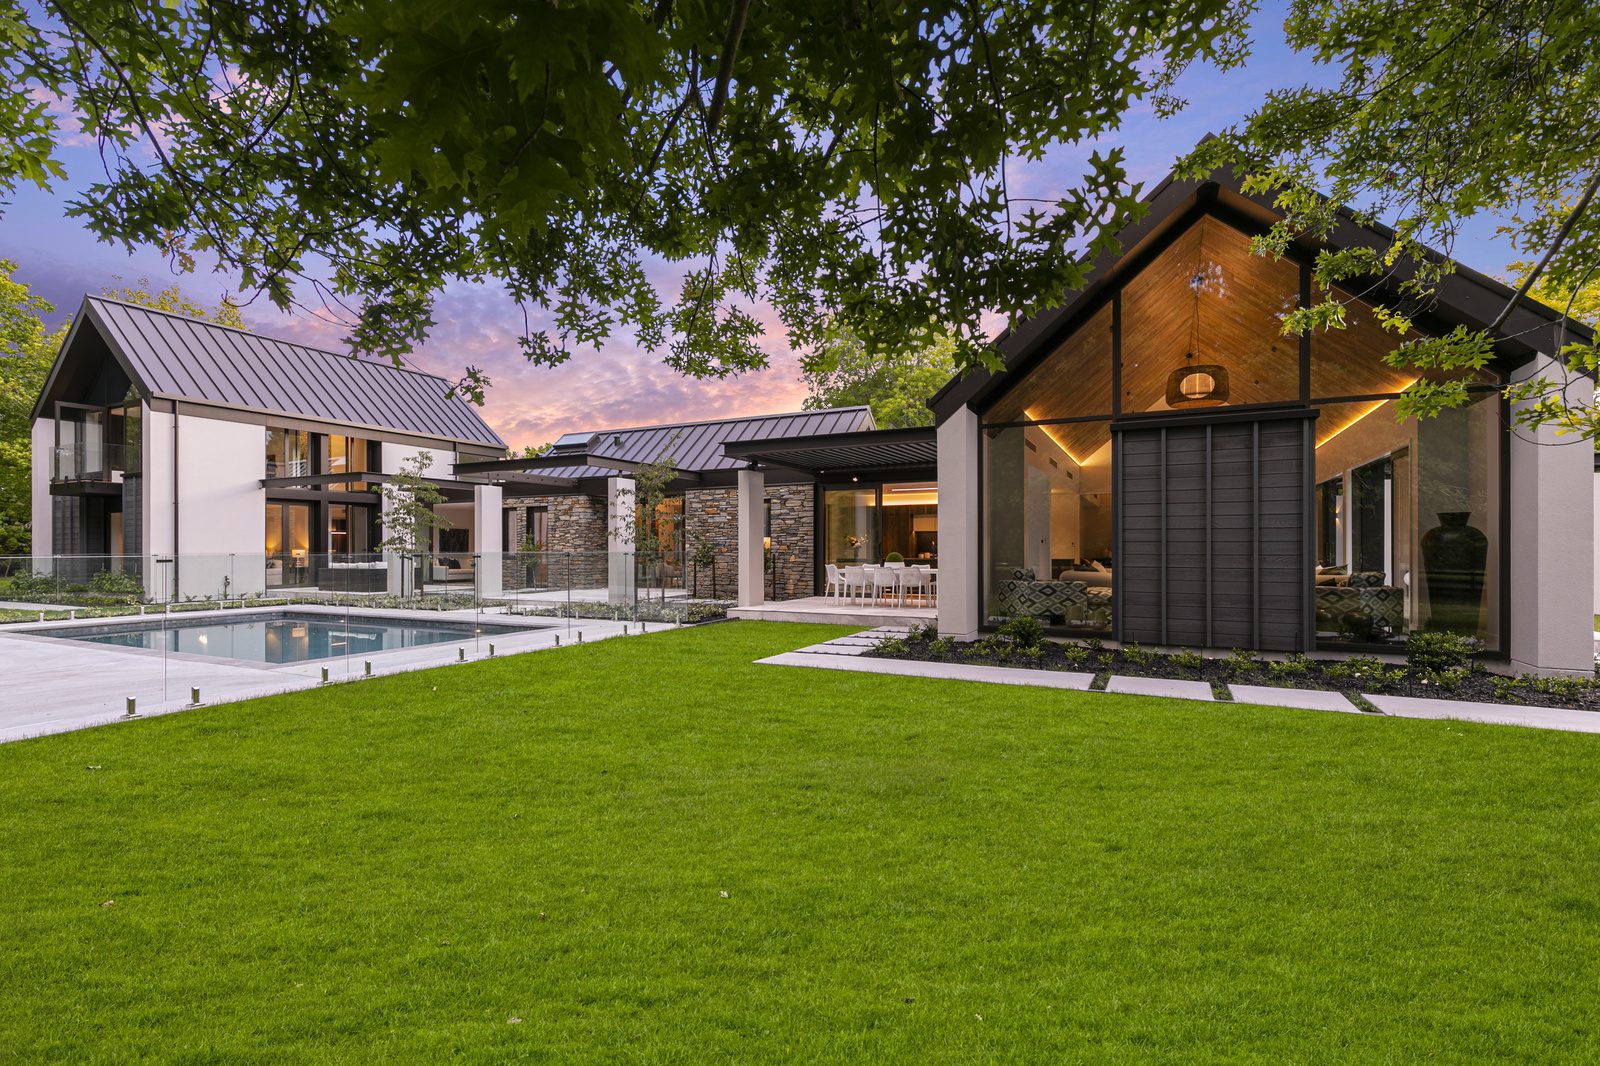 Green lawn, pool and beautiful white, black and brick home.